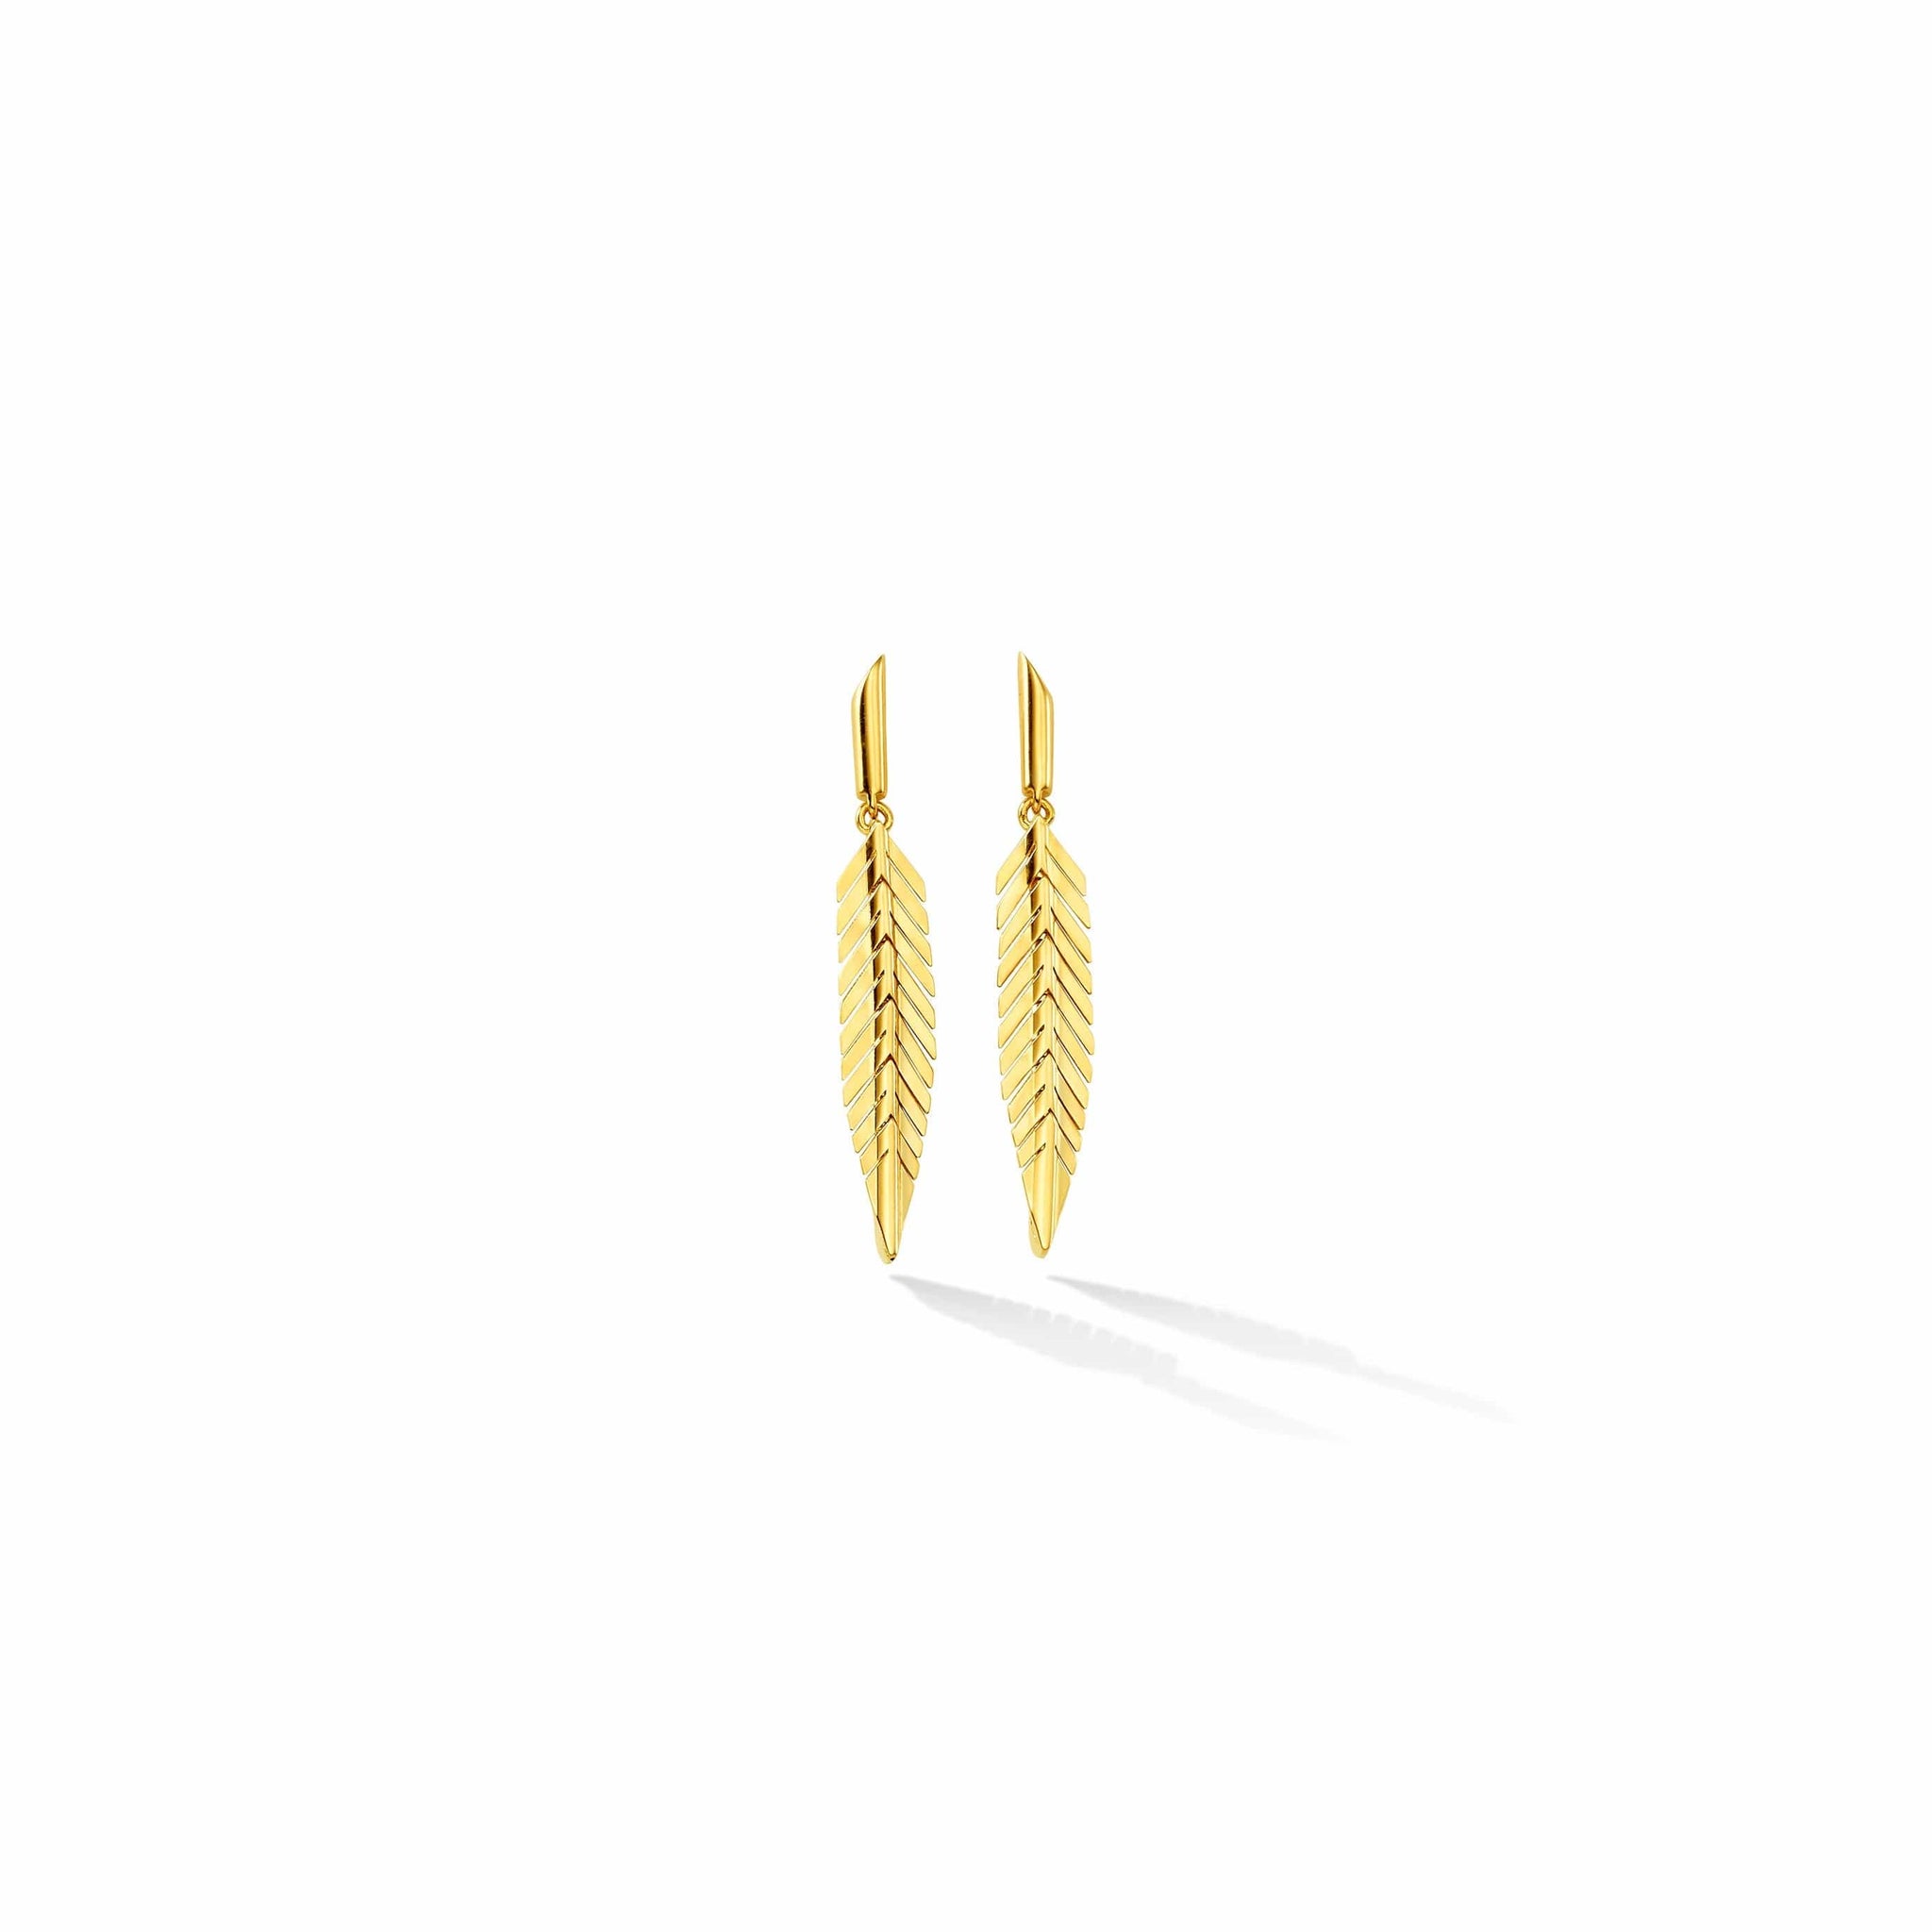 18K Yellow Gold Small Feather Drop Earrings, 18k yellow gold, Long's Jewelers